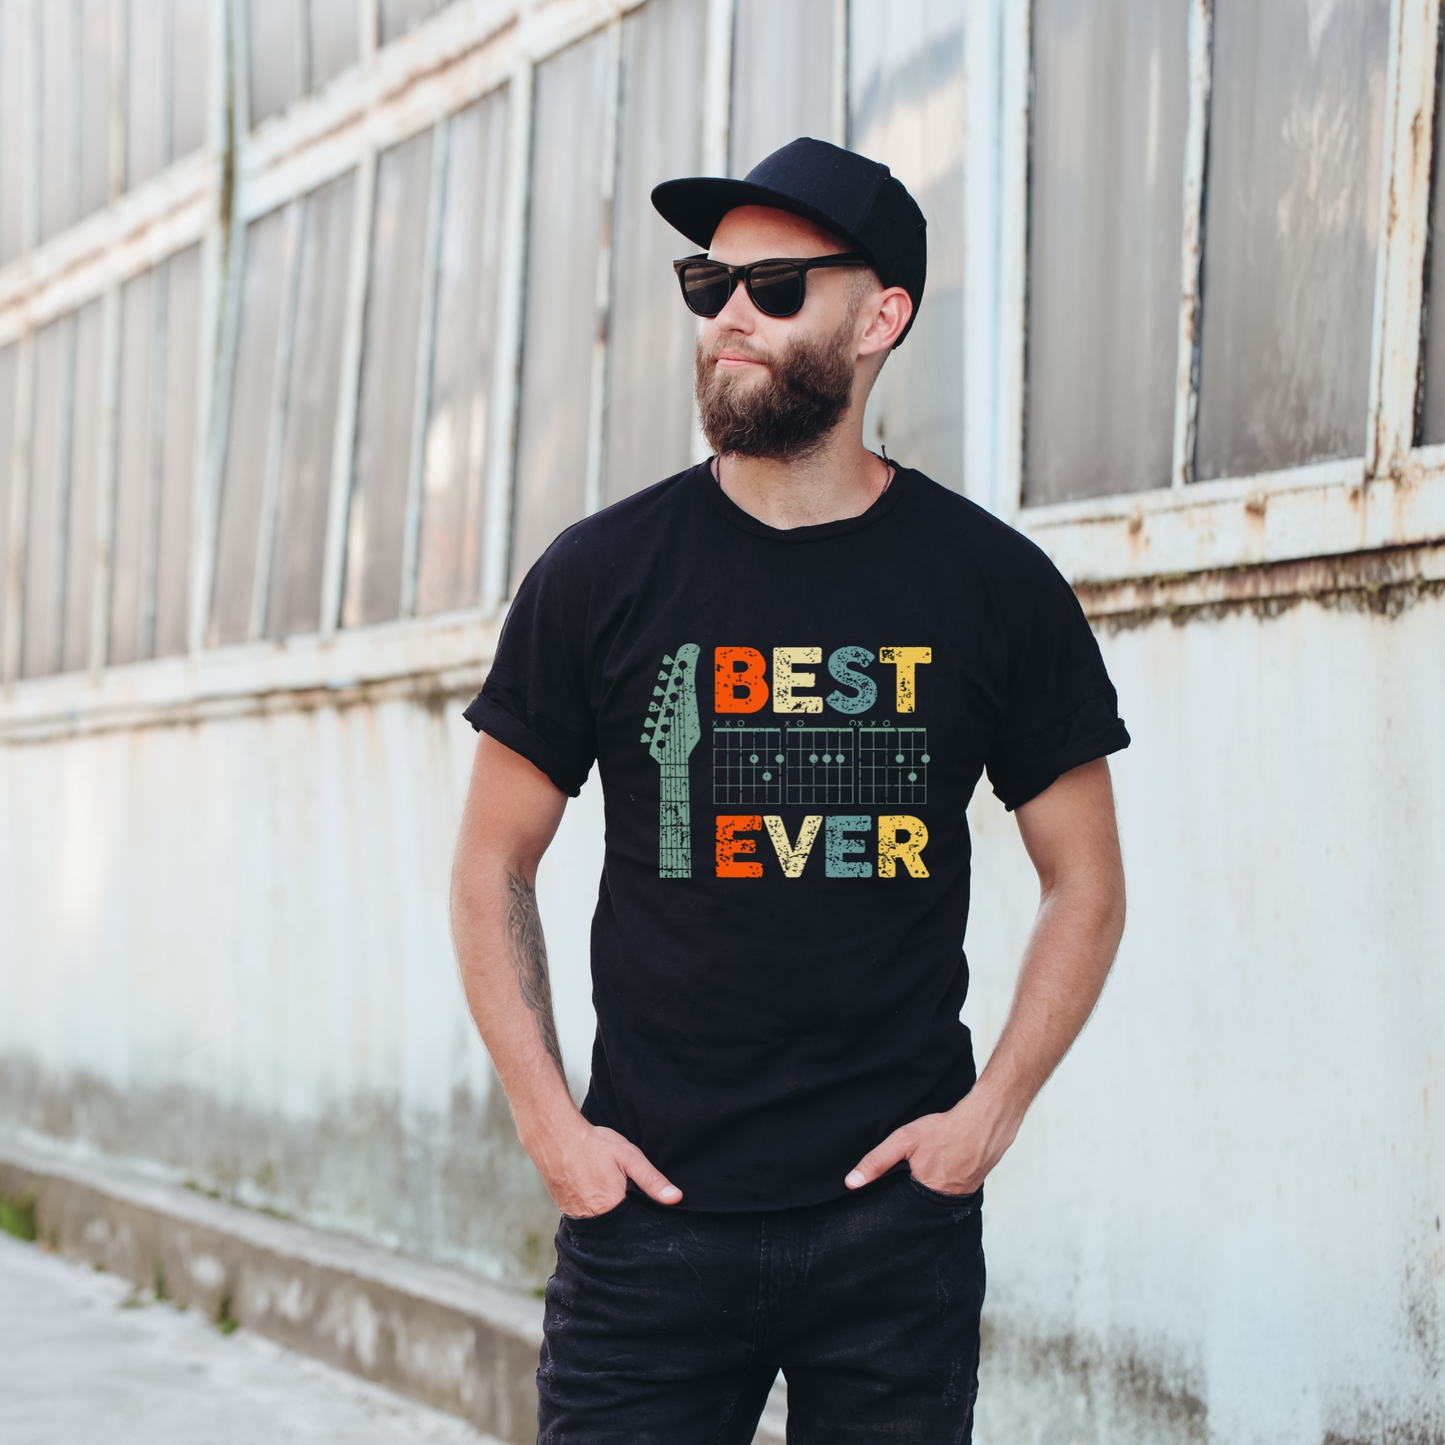 "Best DAD Ever" Daddy T-Shirt: Perfect for the Music-Loving Dad